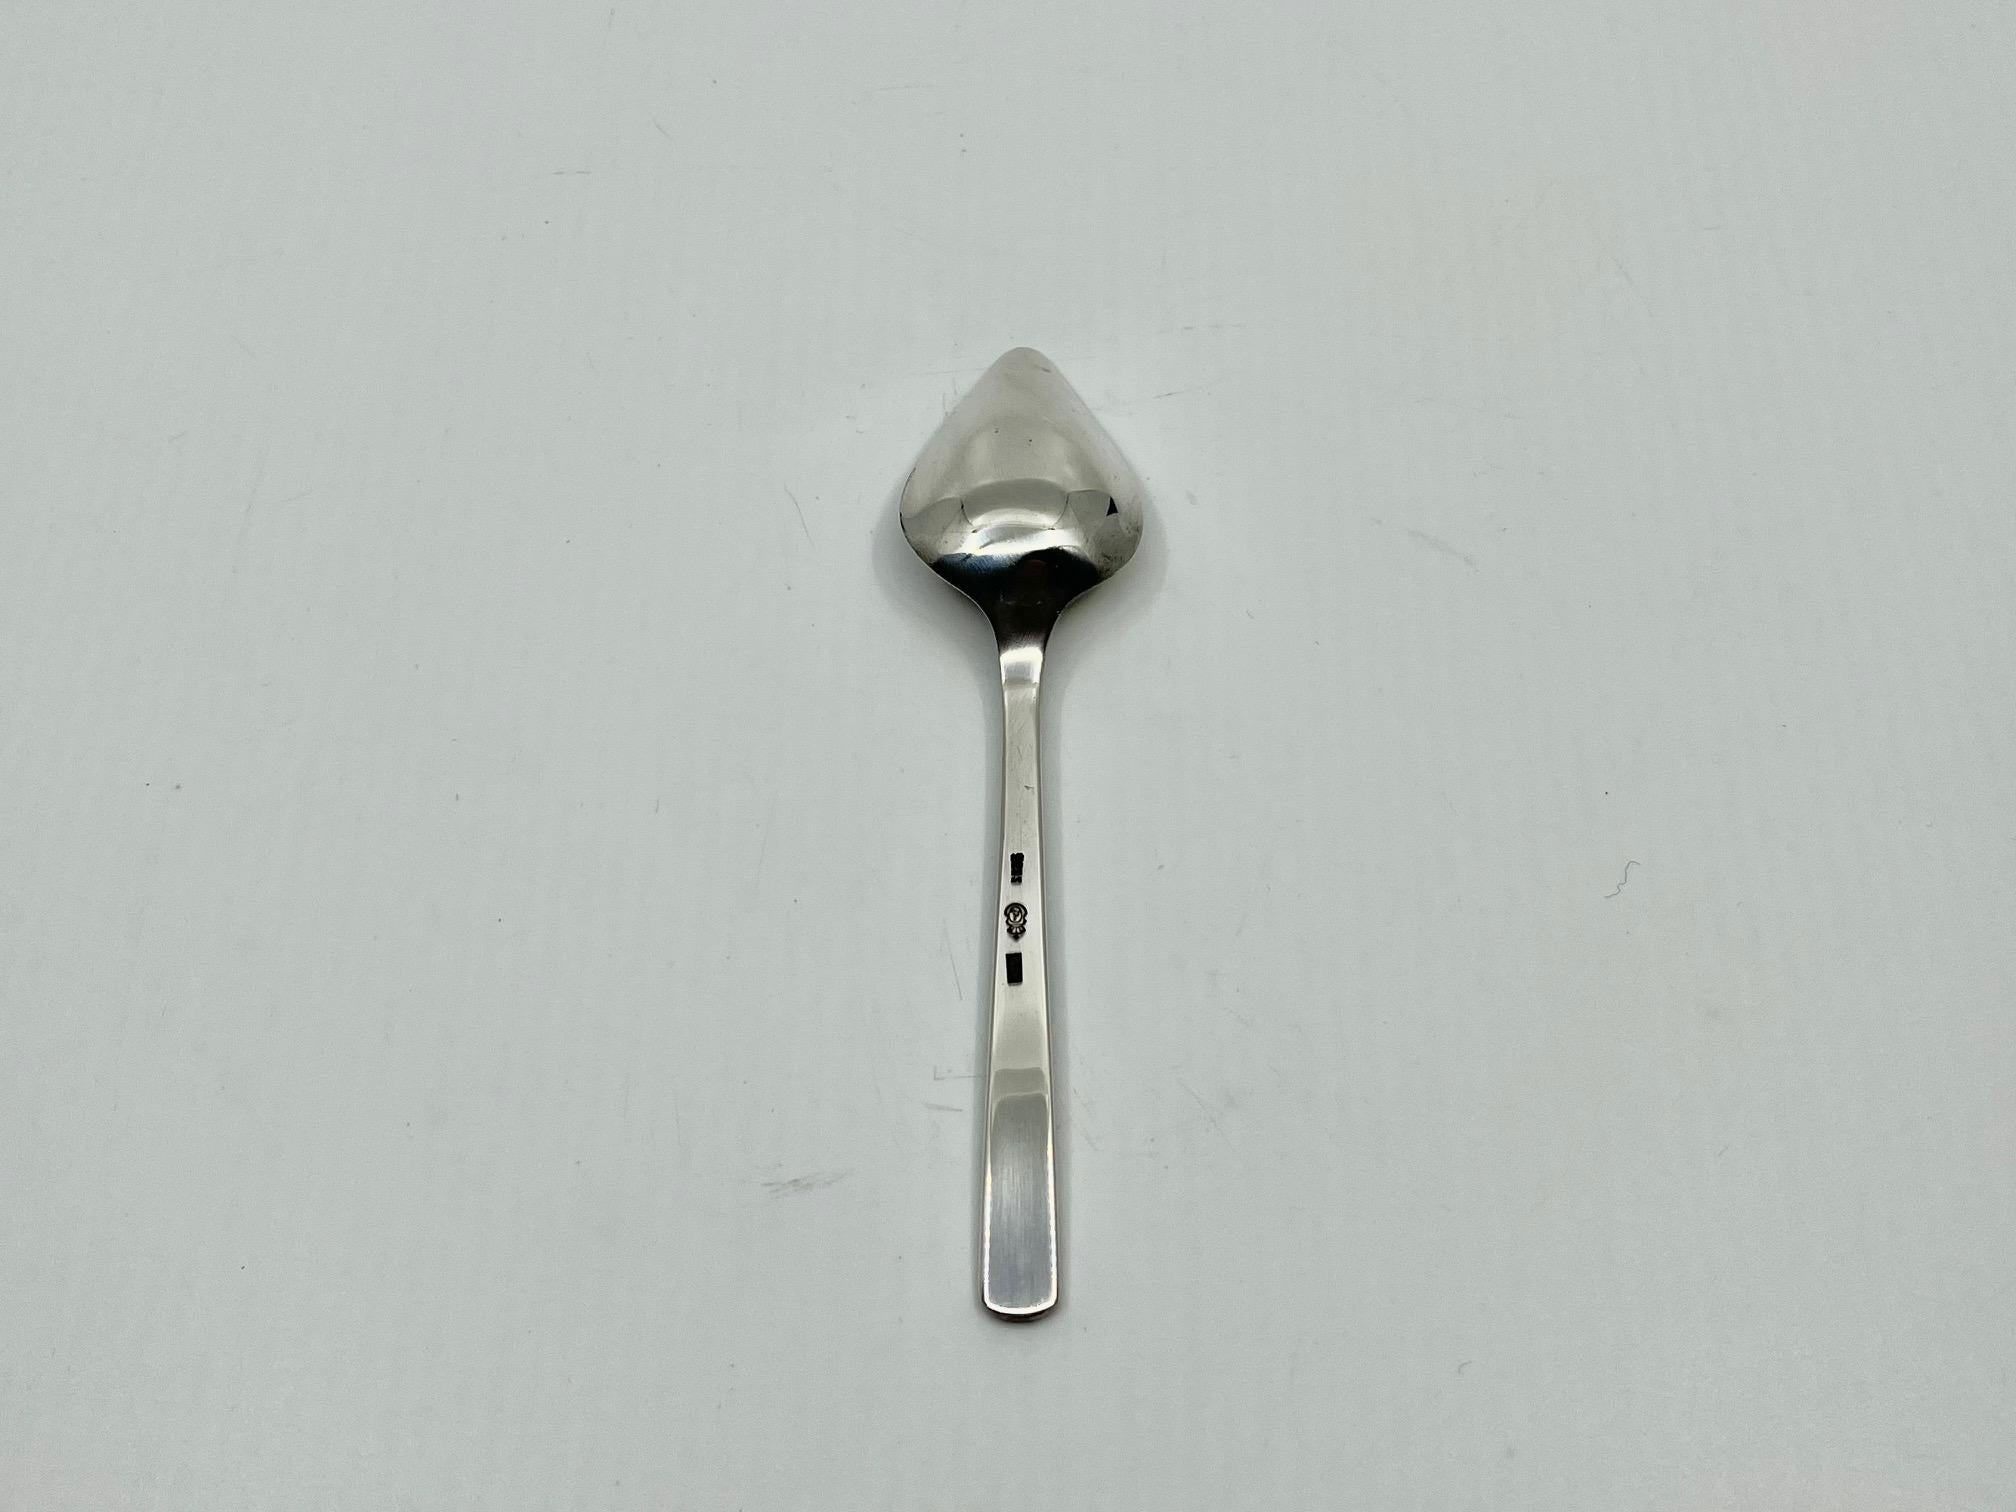 Vintage Georg Jensen sterling silver iced tea spoon, item #078 in the Acorn Pattern, design #62 by Johan Rohde from 1915.

Additional information:
Material: Sterling silver
Styles: Art Nouveau
Hallmarks: With Georg Jensen hallmark, made in